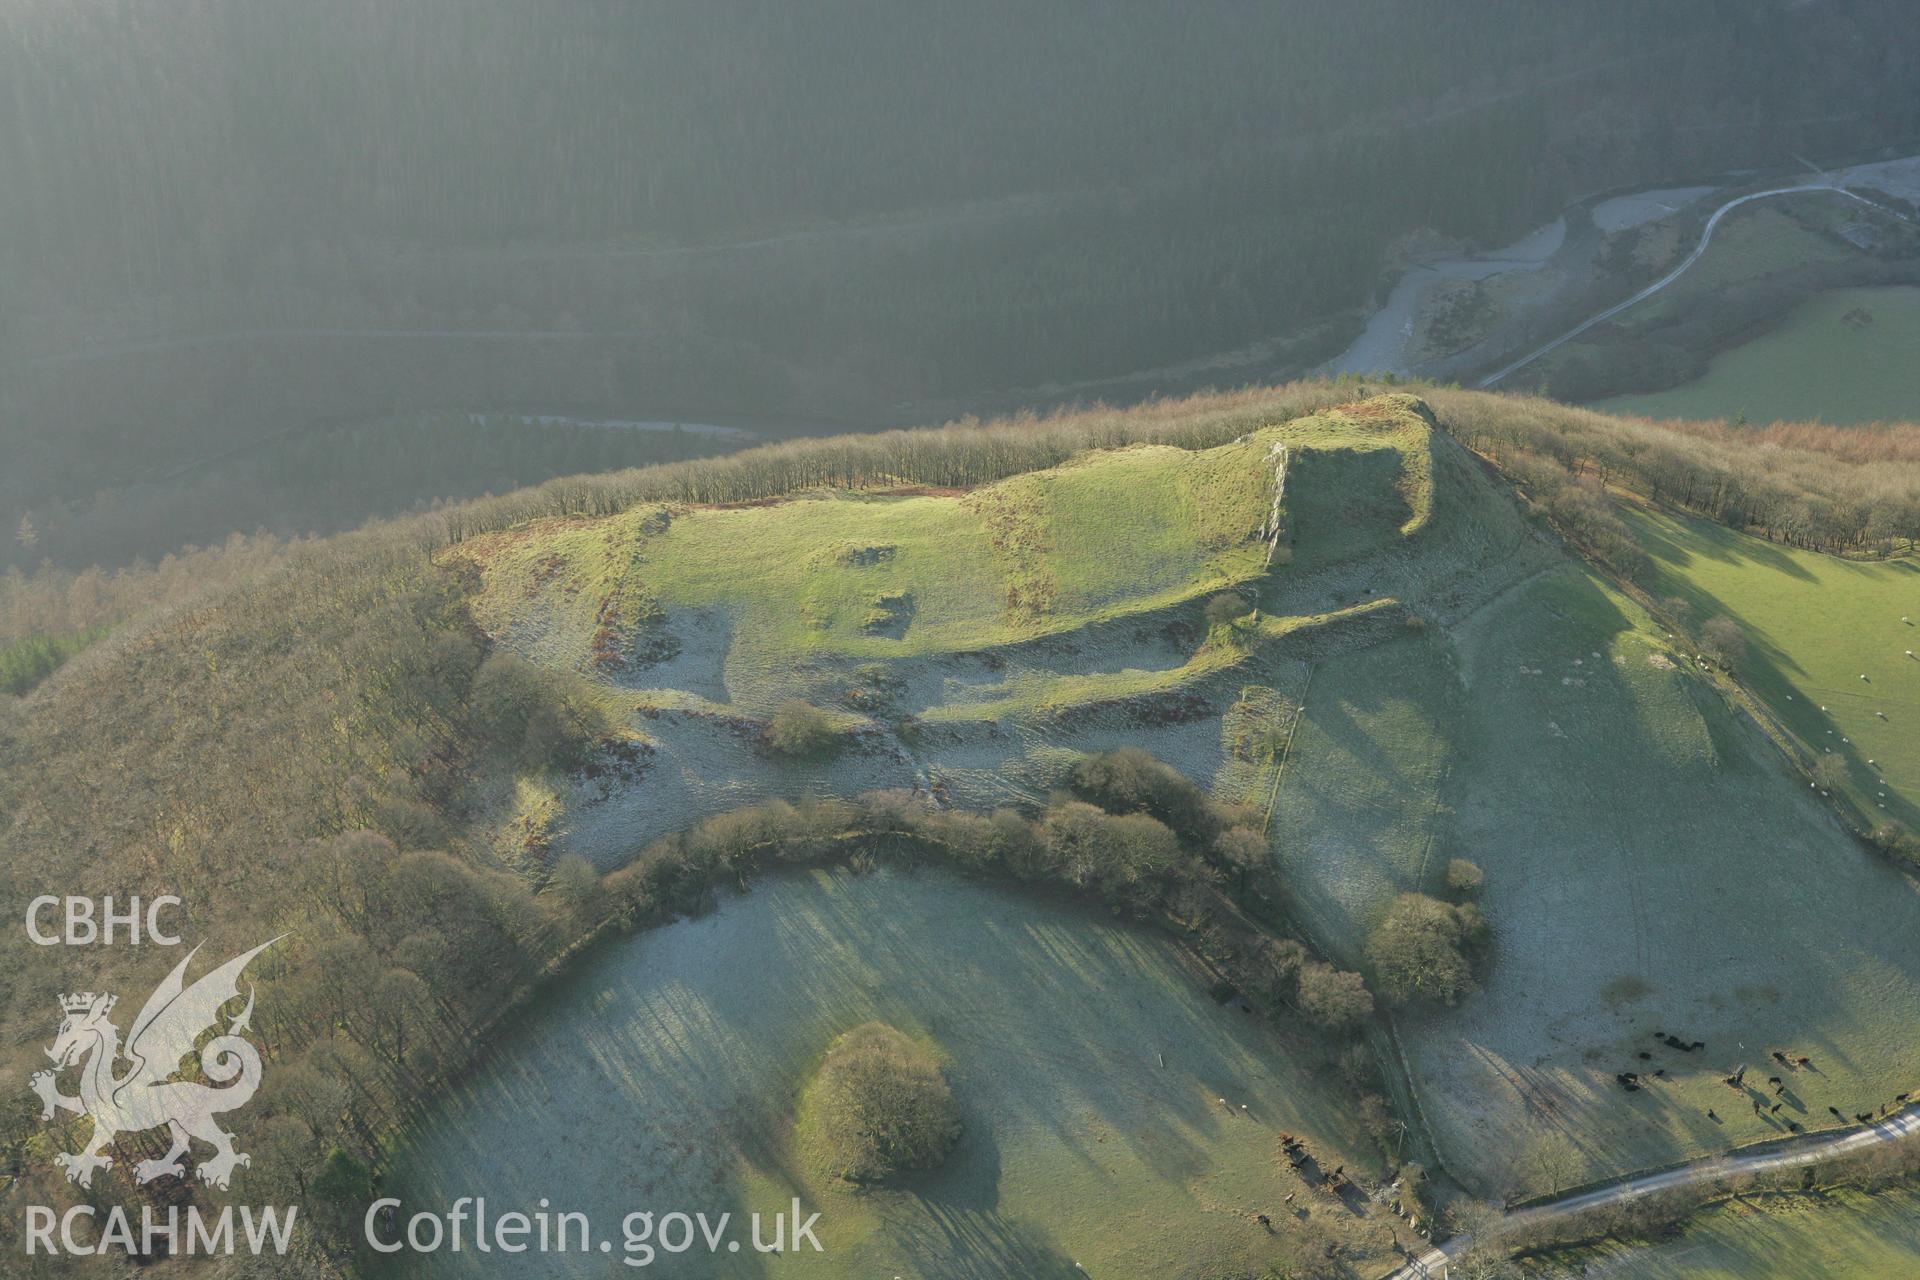 RCAHMW colour oblique photograph of Castell Grogwynion hillfort. Taken by Toby Driver on 20/12/2007.